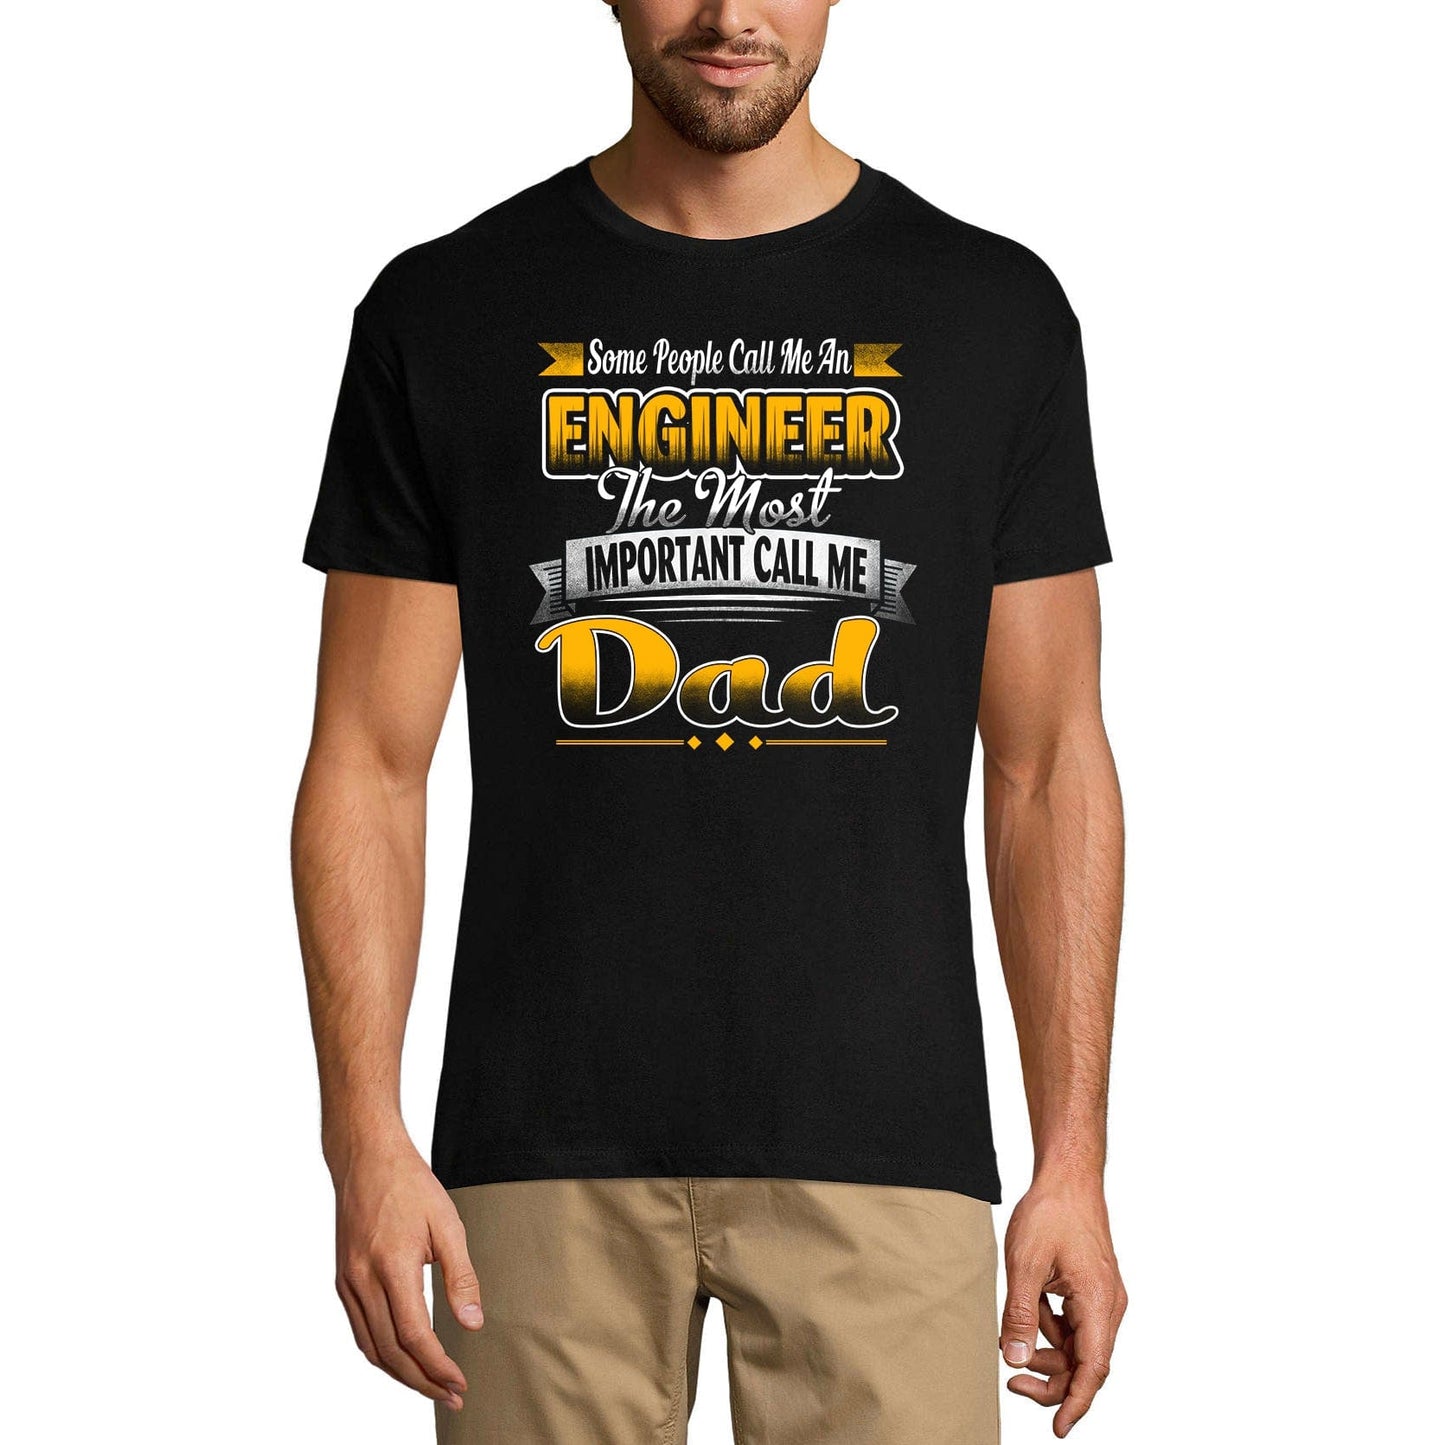 ULTRABASIC Men's T-Shirt Some People Call Me an Engineer the Most Important Call Me Dad